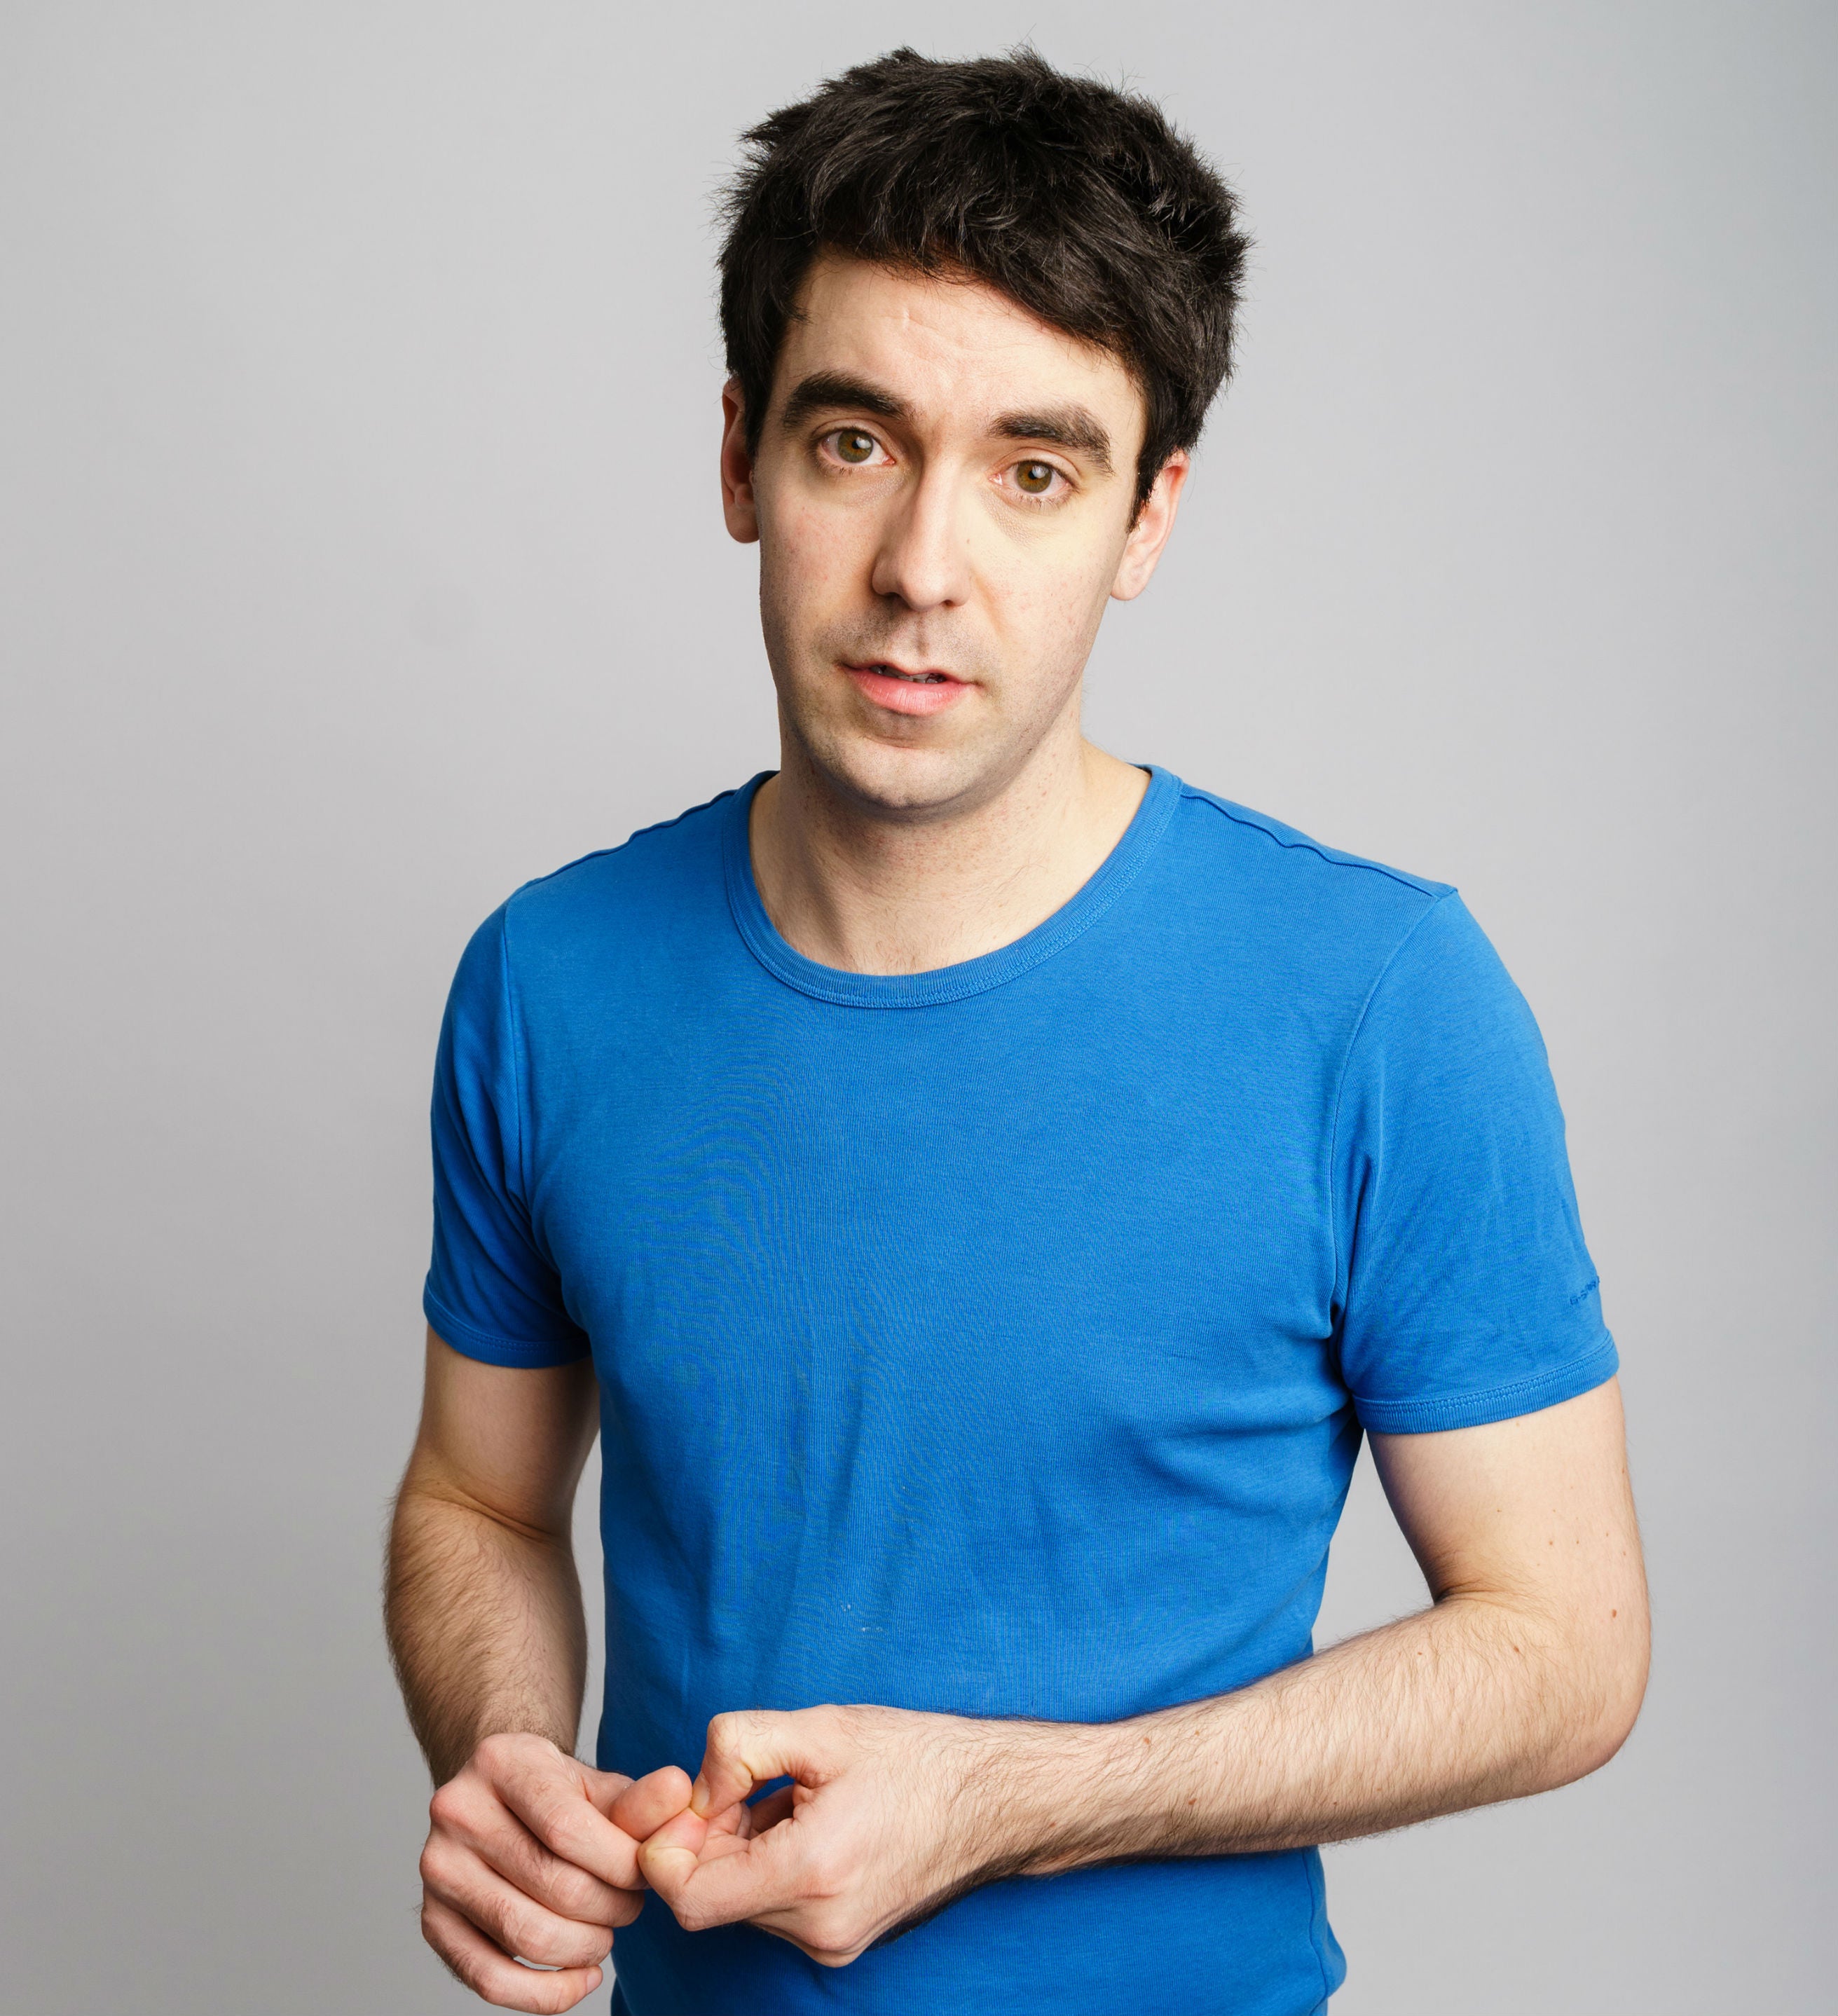 Adam Hess, who already has a large following on Twitter, makes his debut at the Edinburgh Fringe with his show 'Salmon'